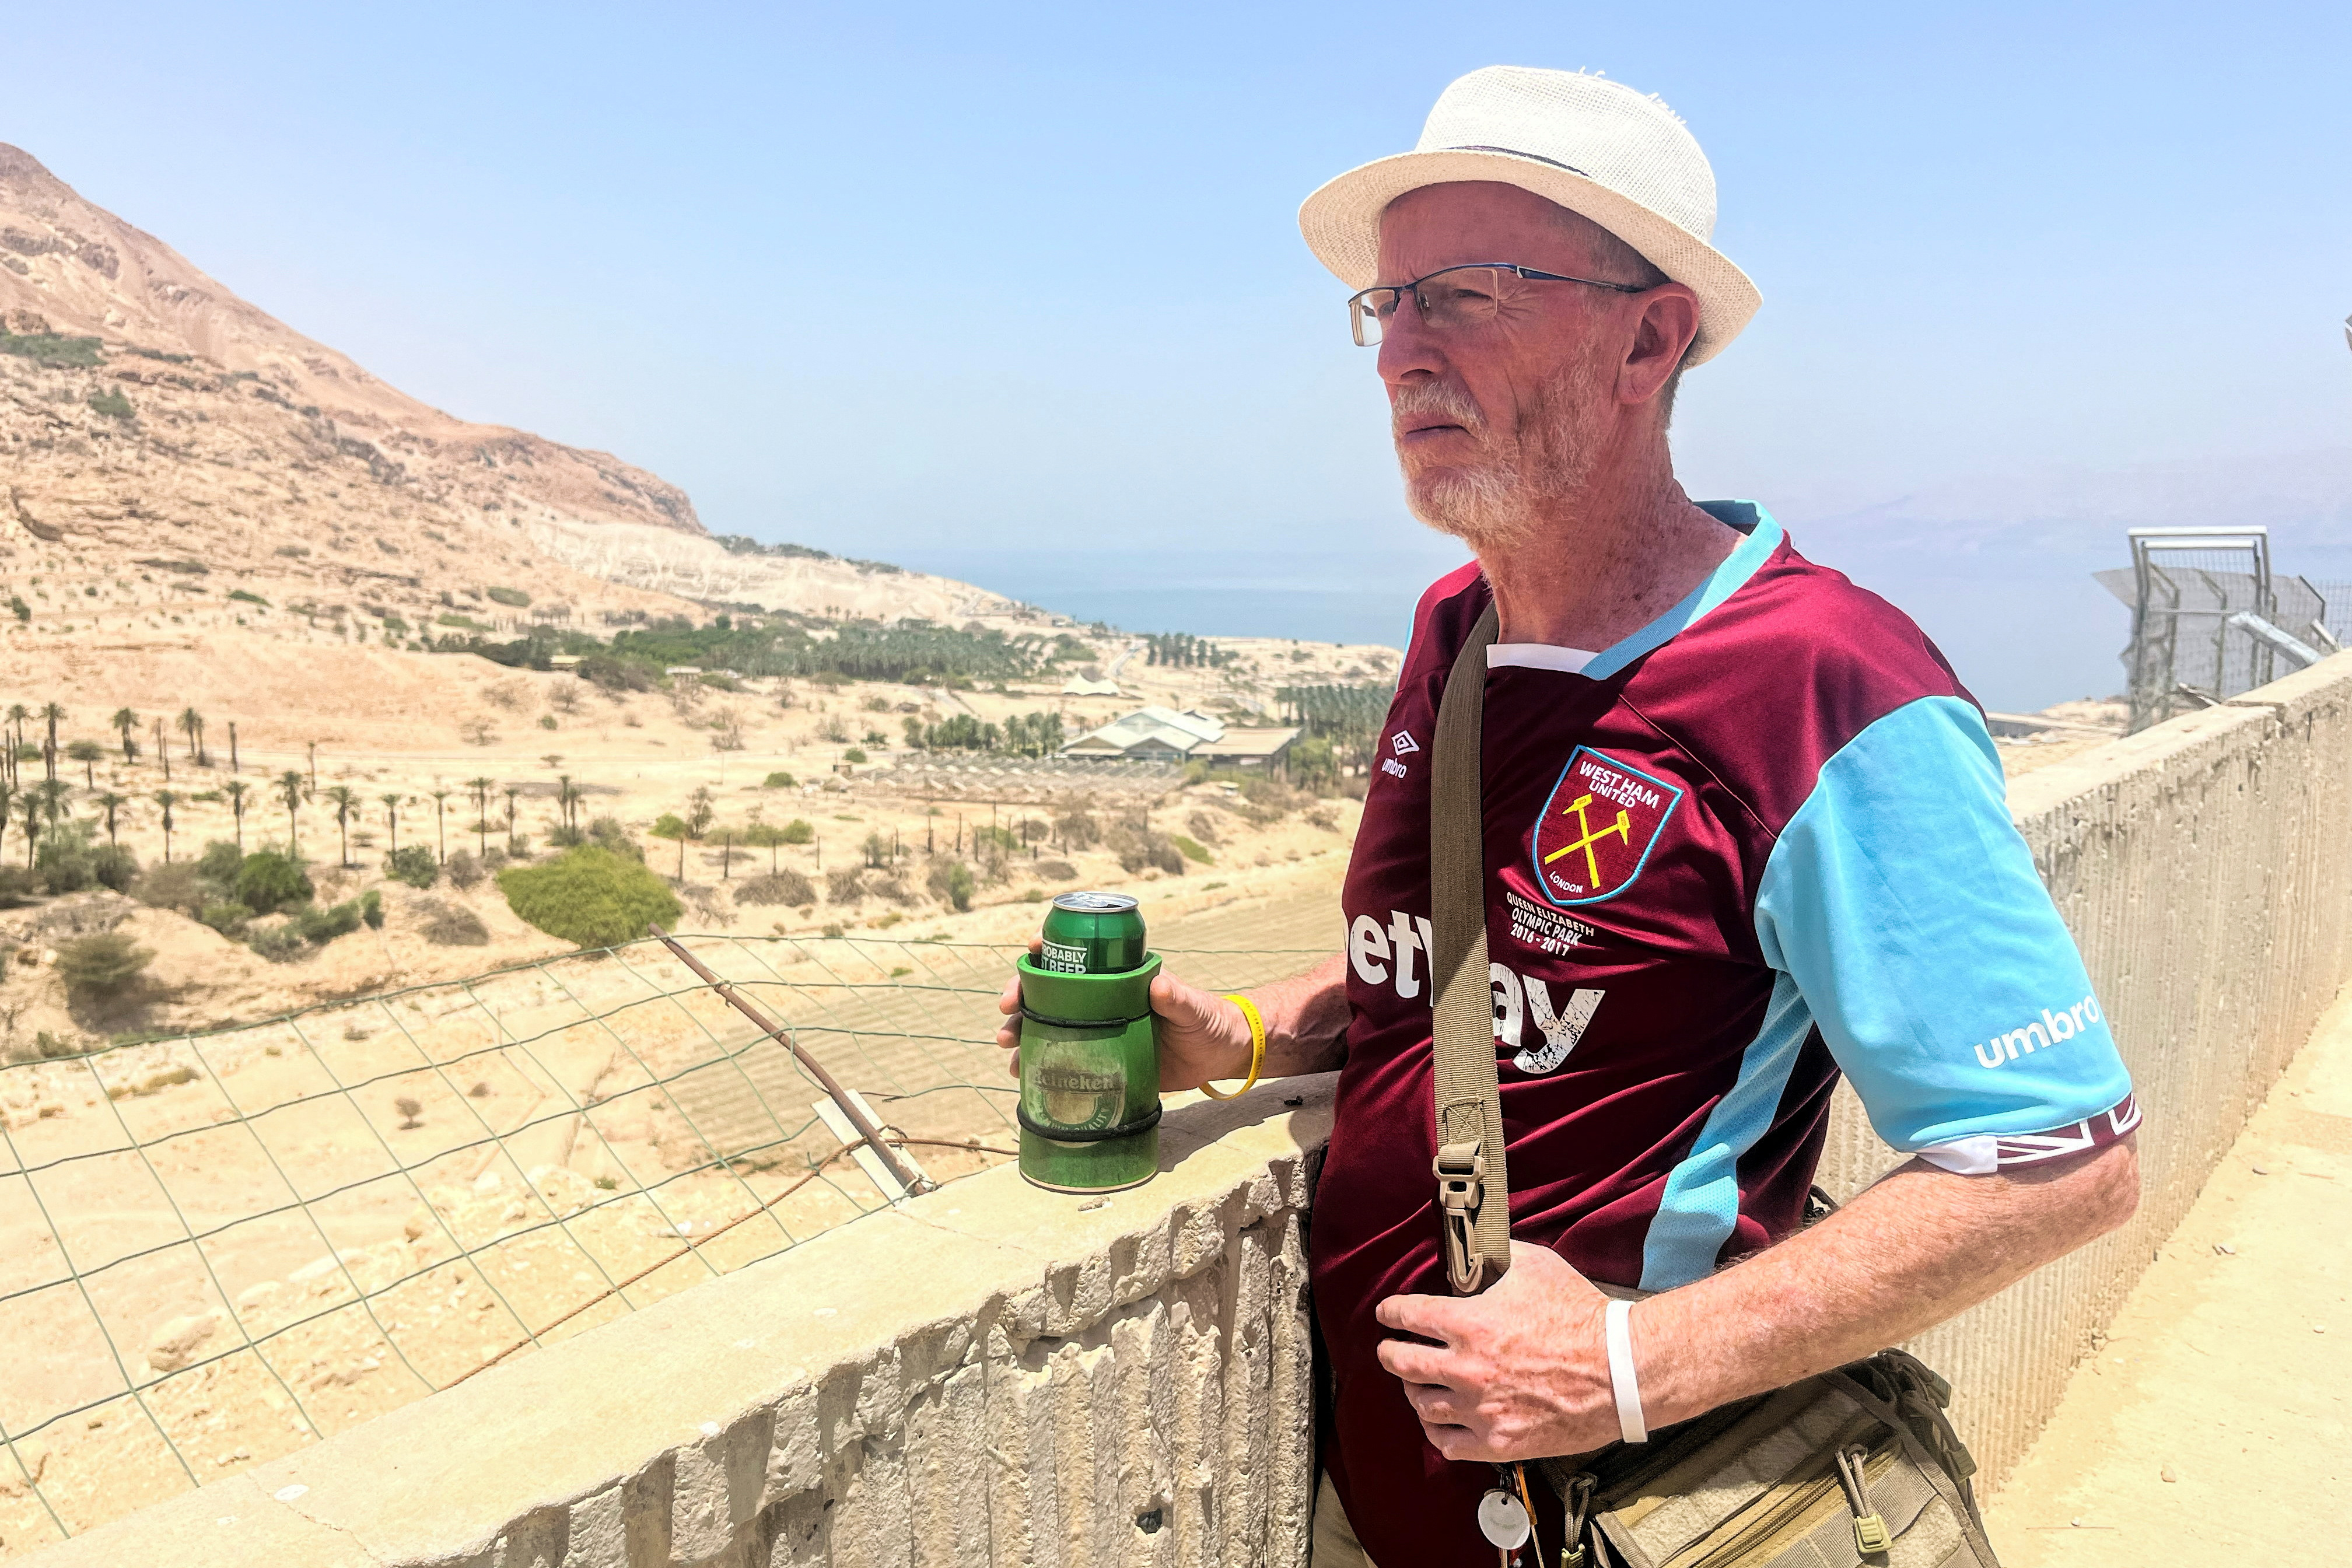 Thomas Hand, the Irish-born father of 9-year-old Emily Hand who was taken hostage by Hamas on October 7 and was returned in a hostages-prisoners swap deal, looks out towards the desert from his temporary accommodation in Ein Gedi